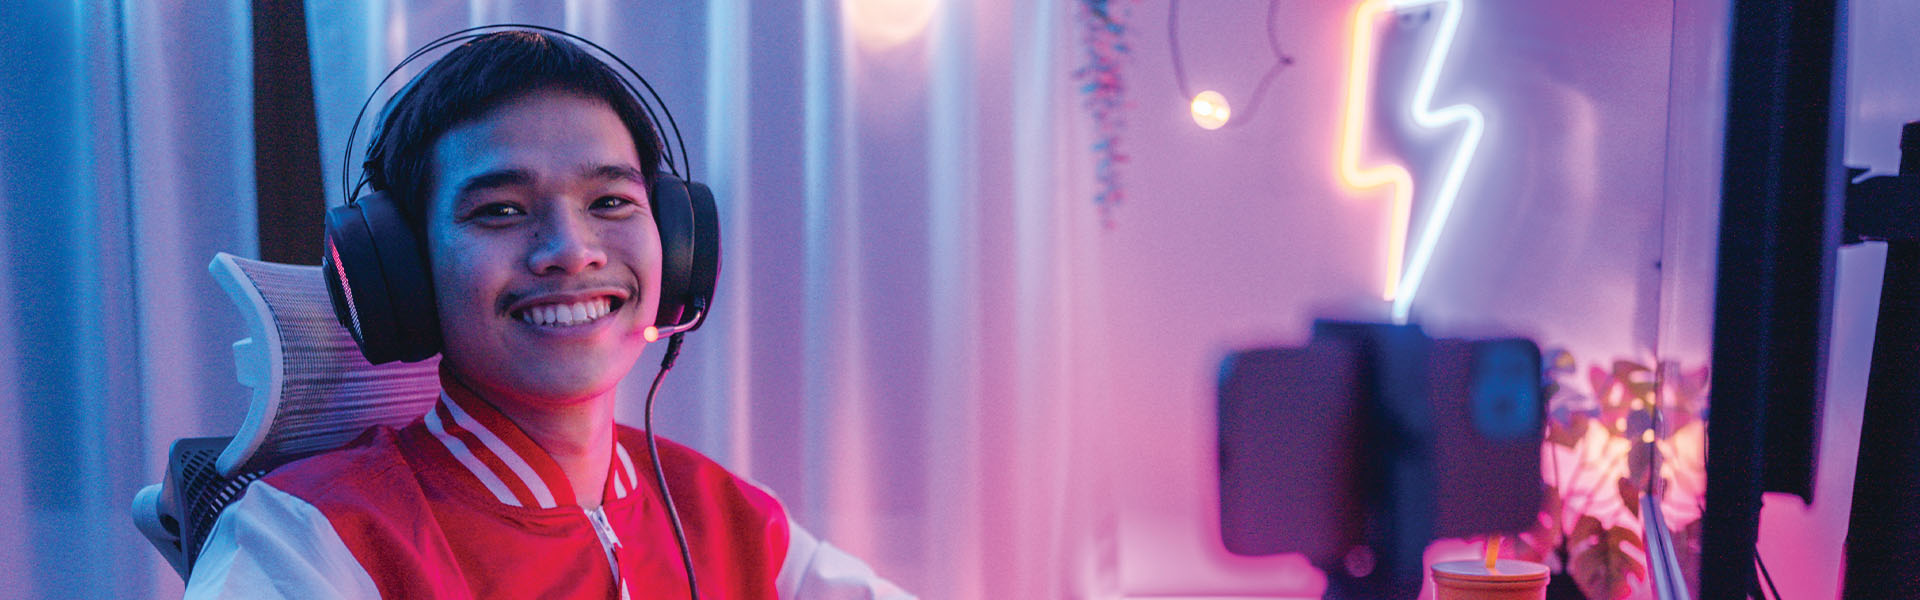 A stock image of a young person at a computer set-up wearing a gaming headset.